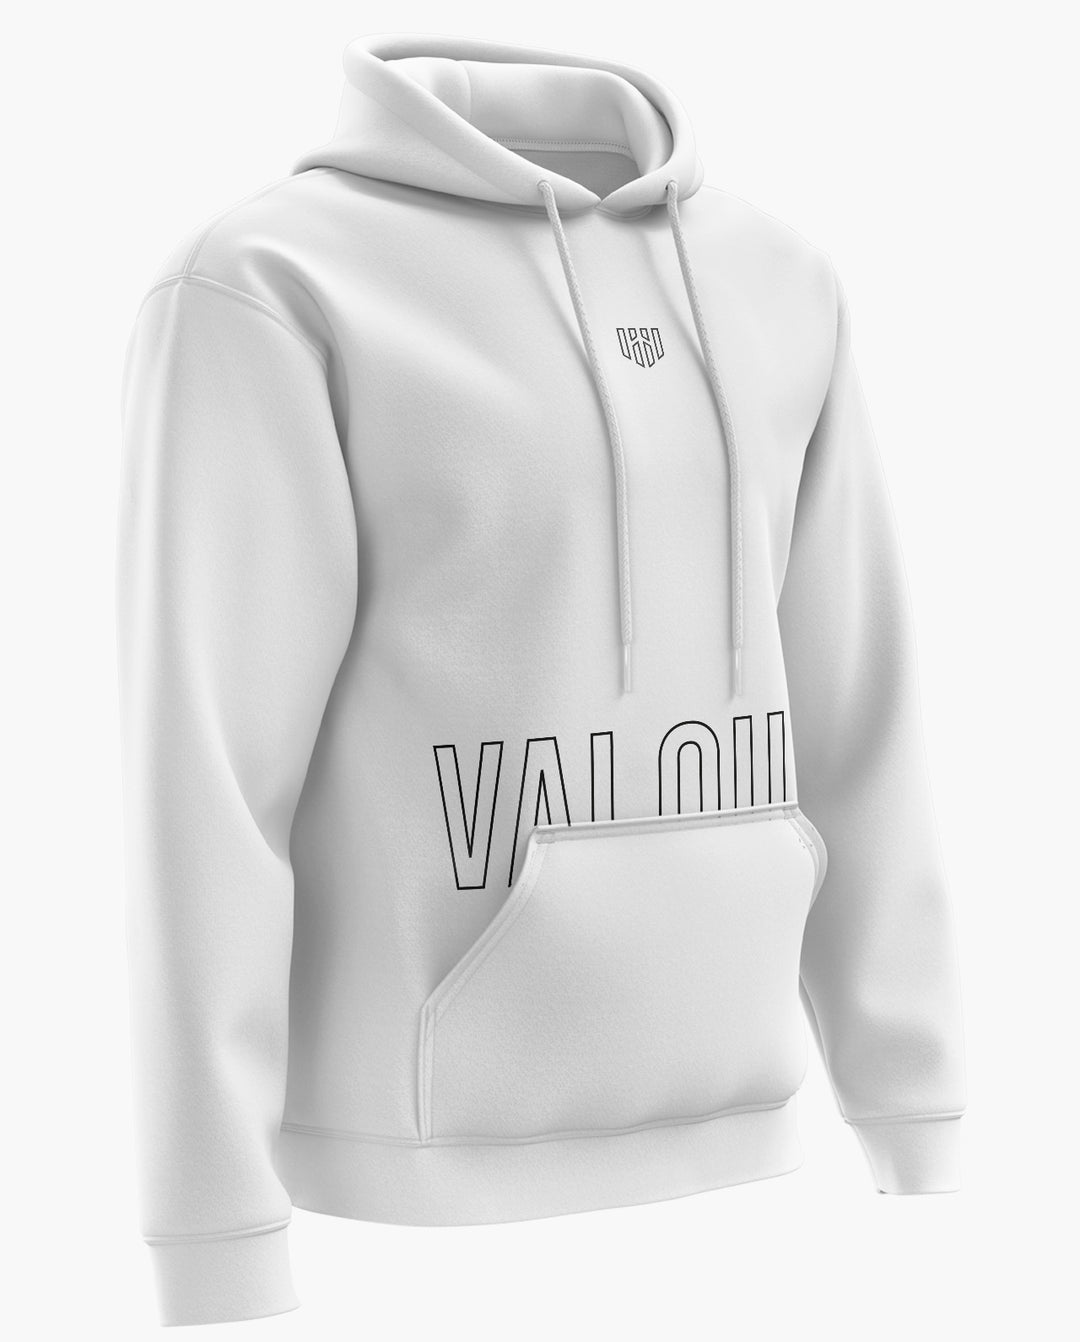 Valour Within Hoodie